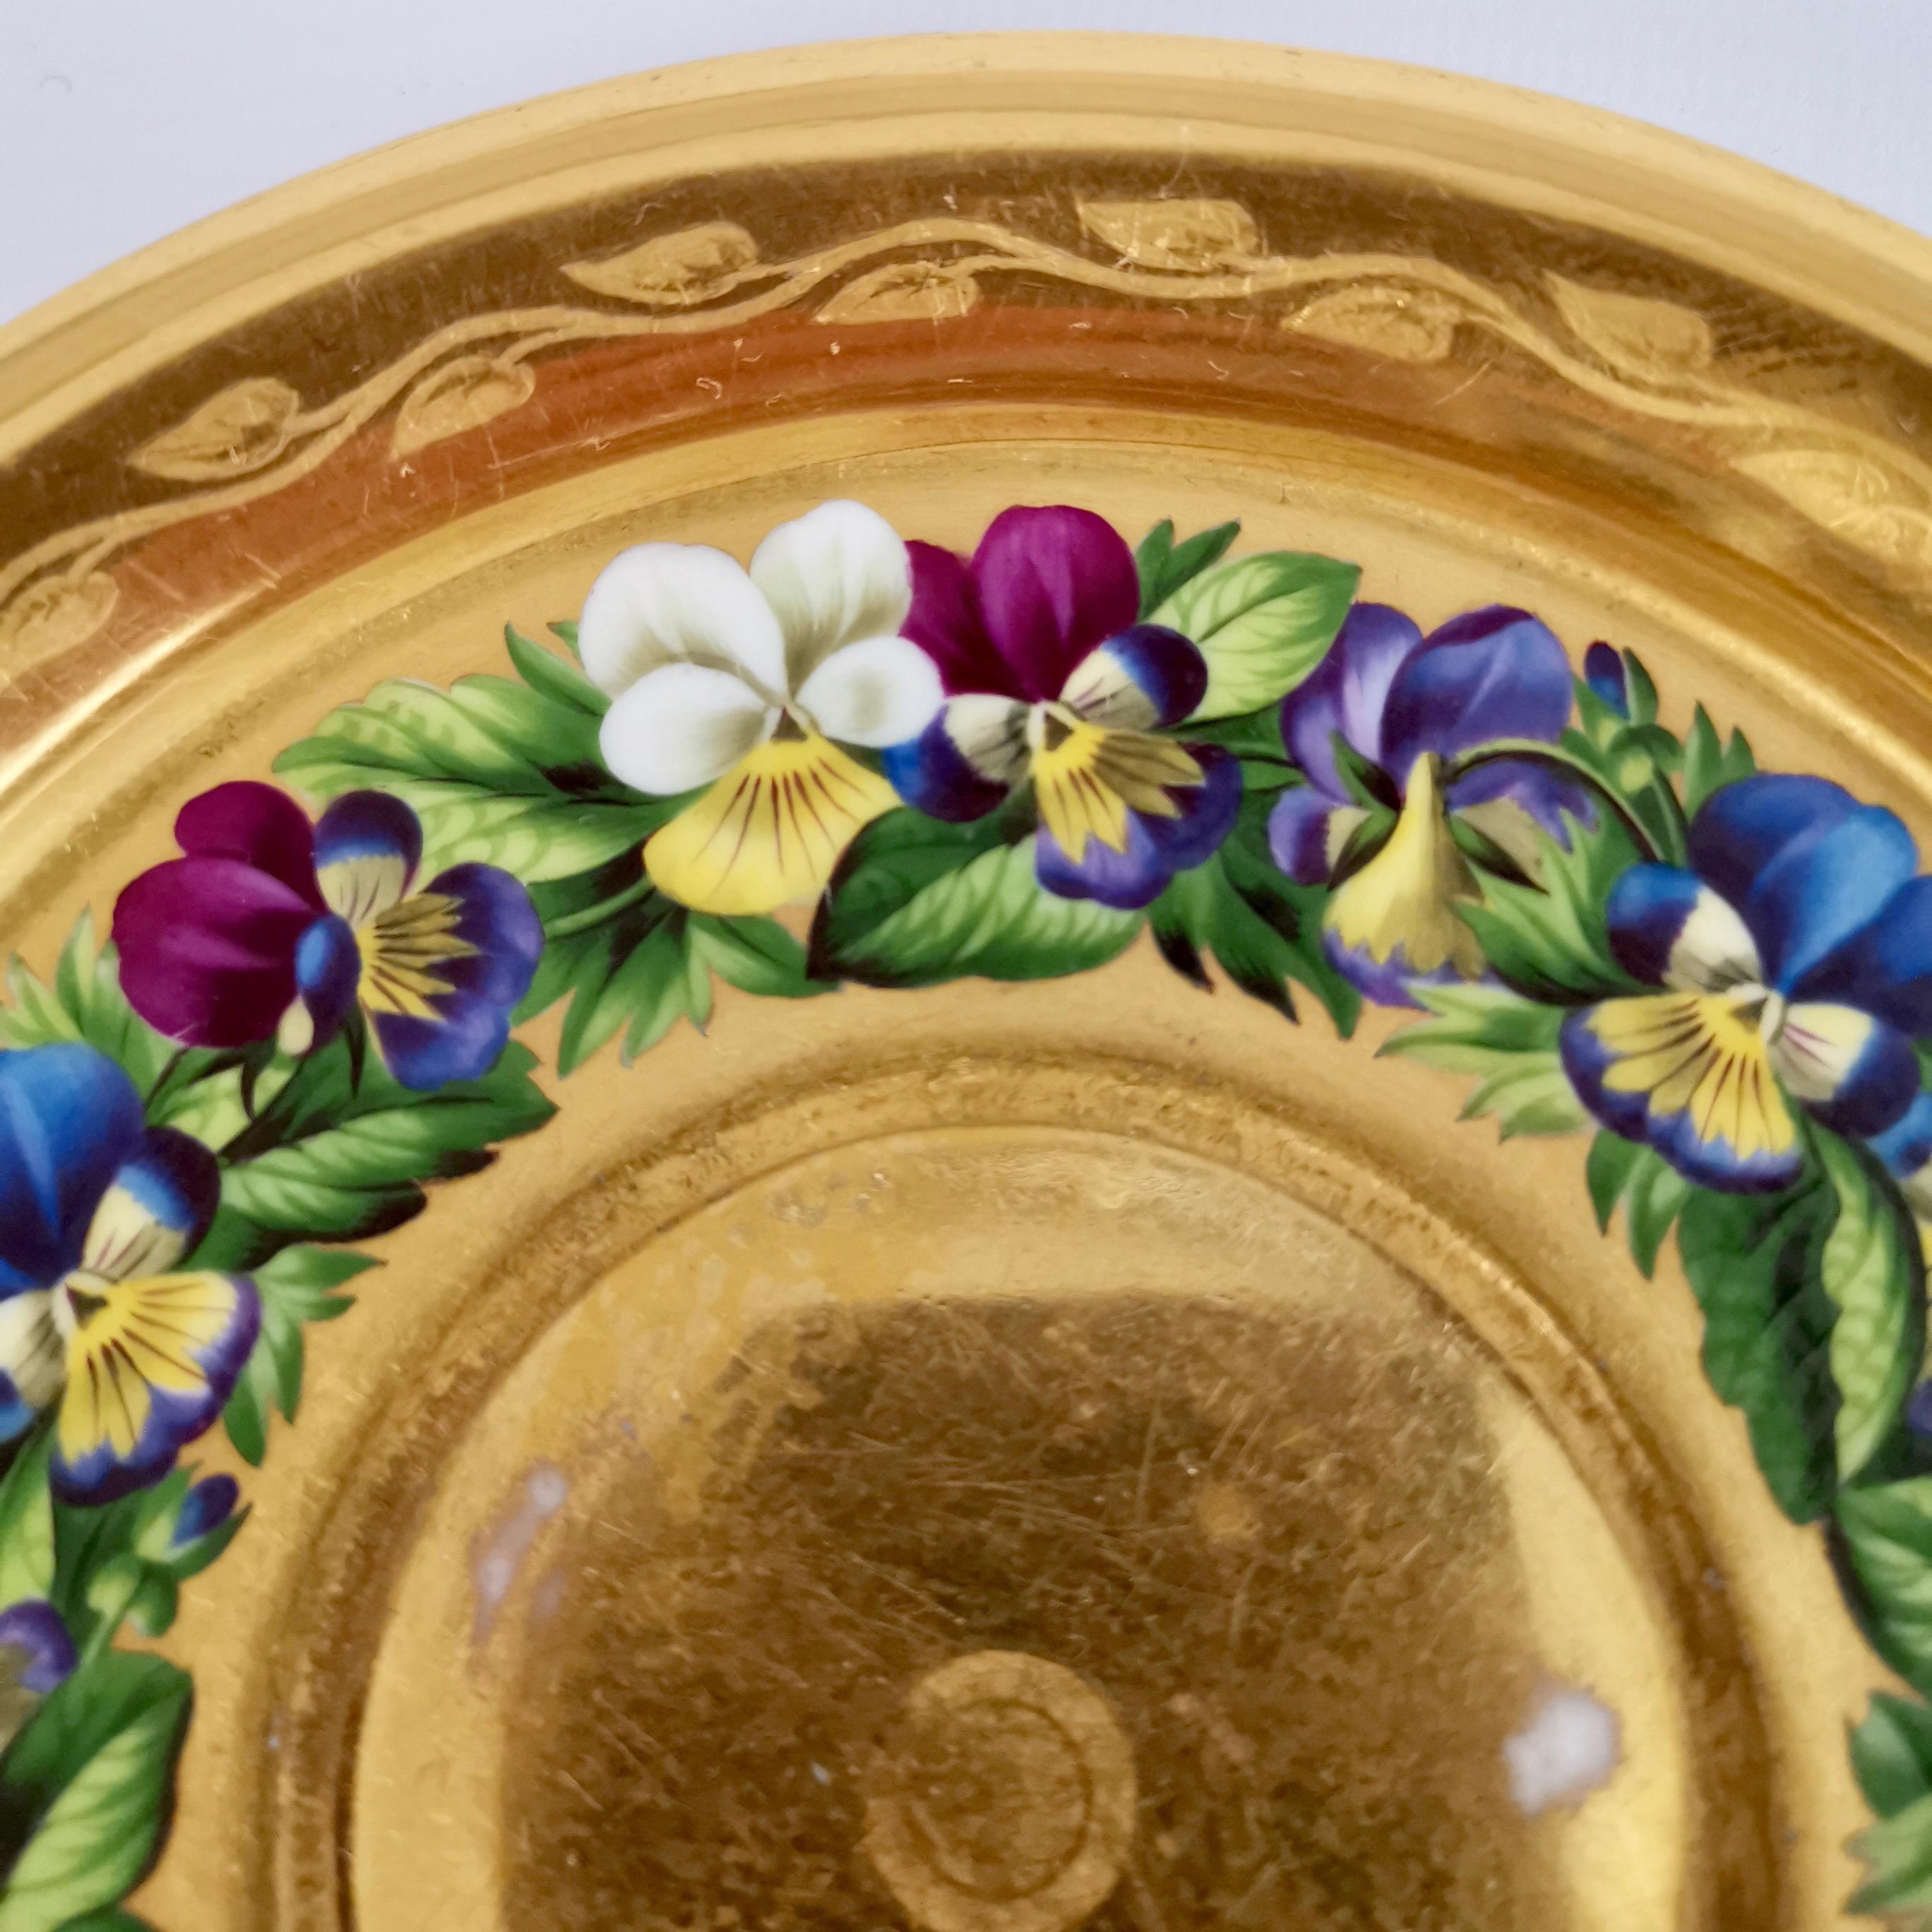 Vienna Porcelain Teacup and Saucer, Gilt and Pansies by Anton Friedl, 1826 7